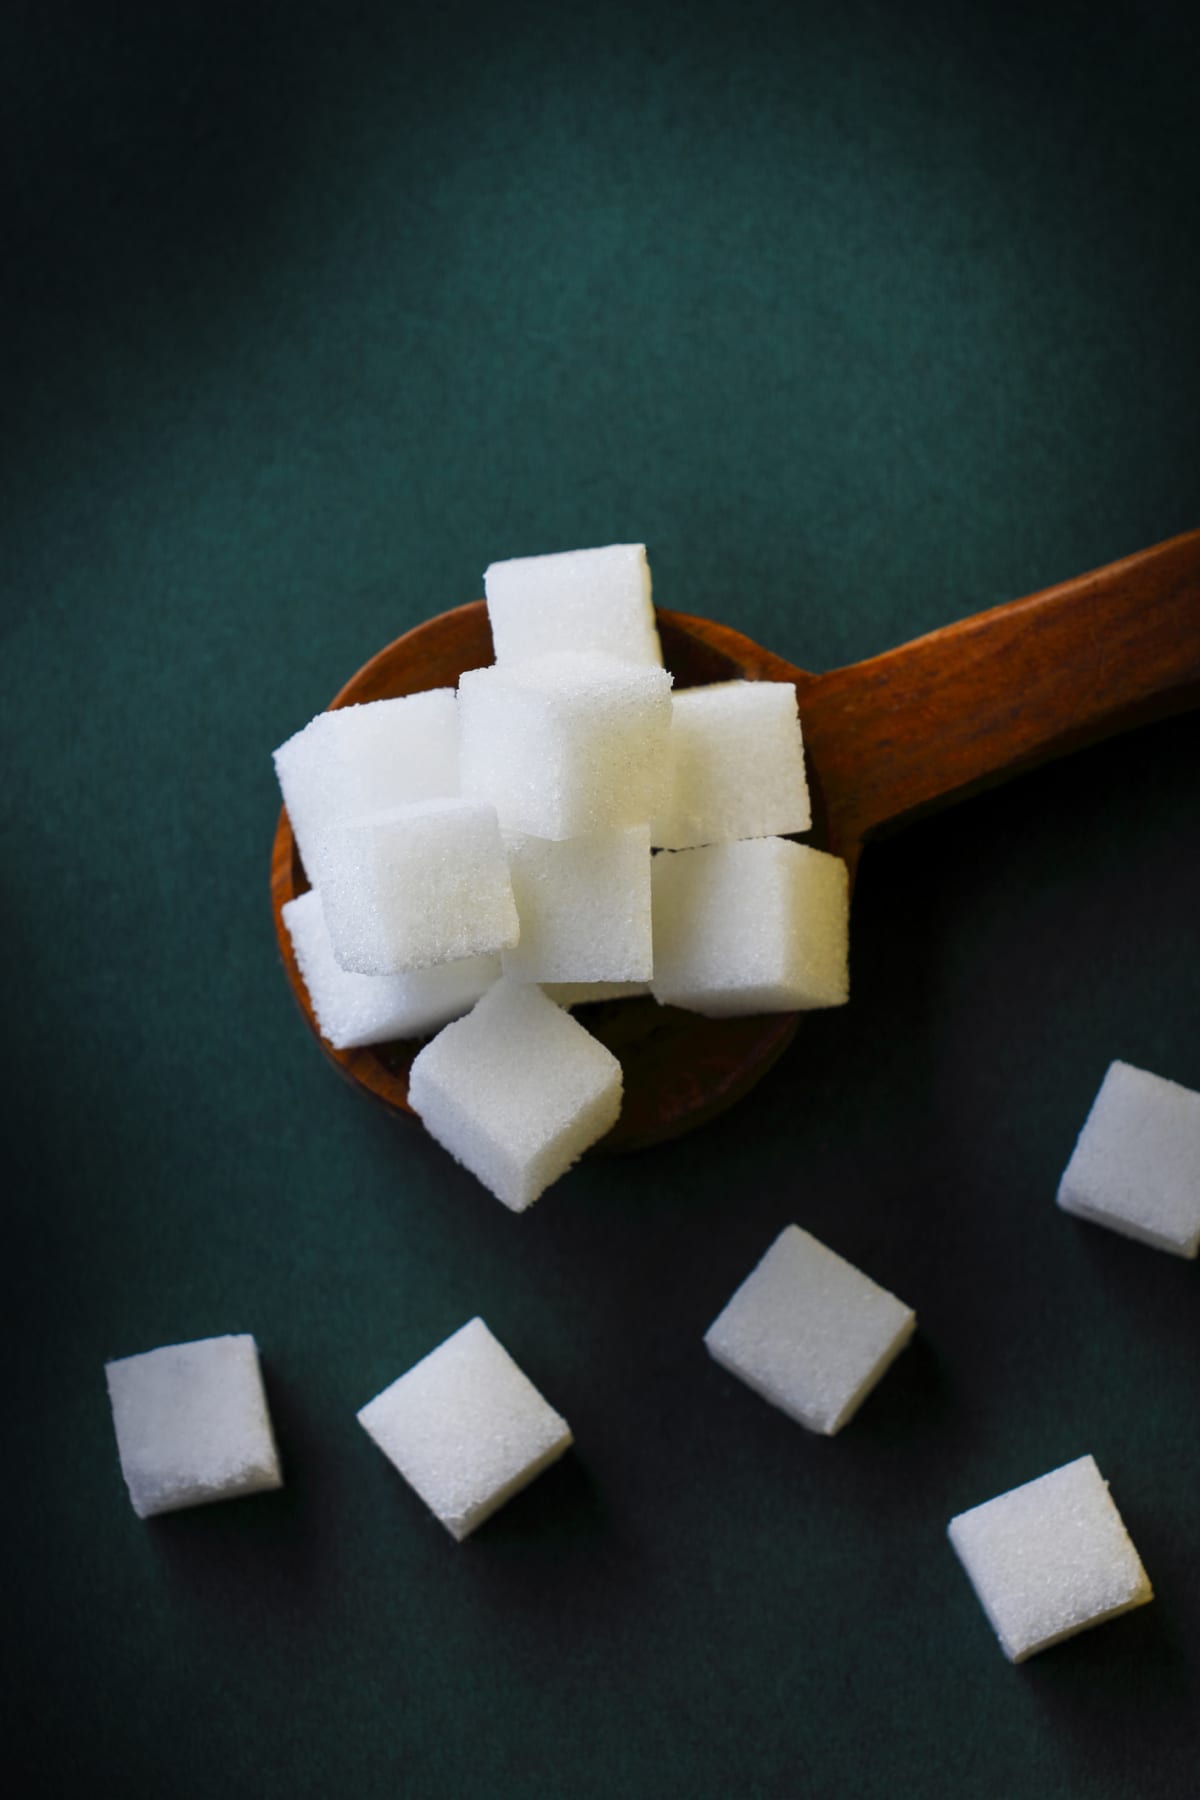 Sugar cubes in a wooden spoon